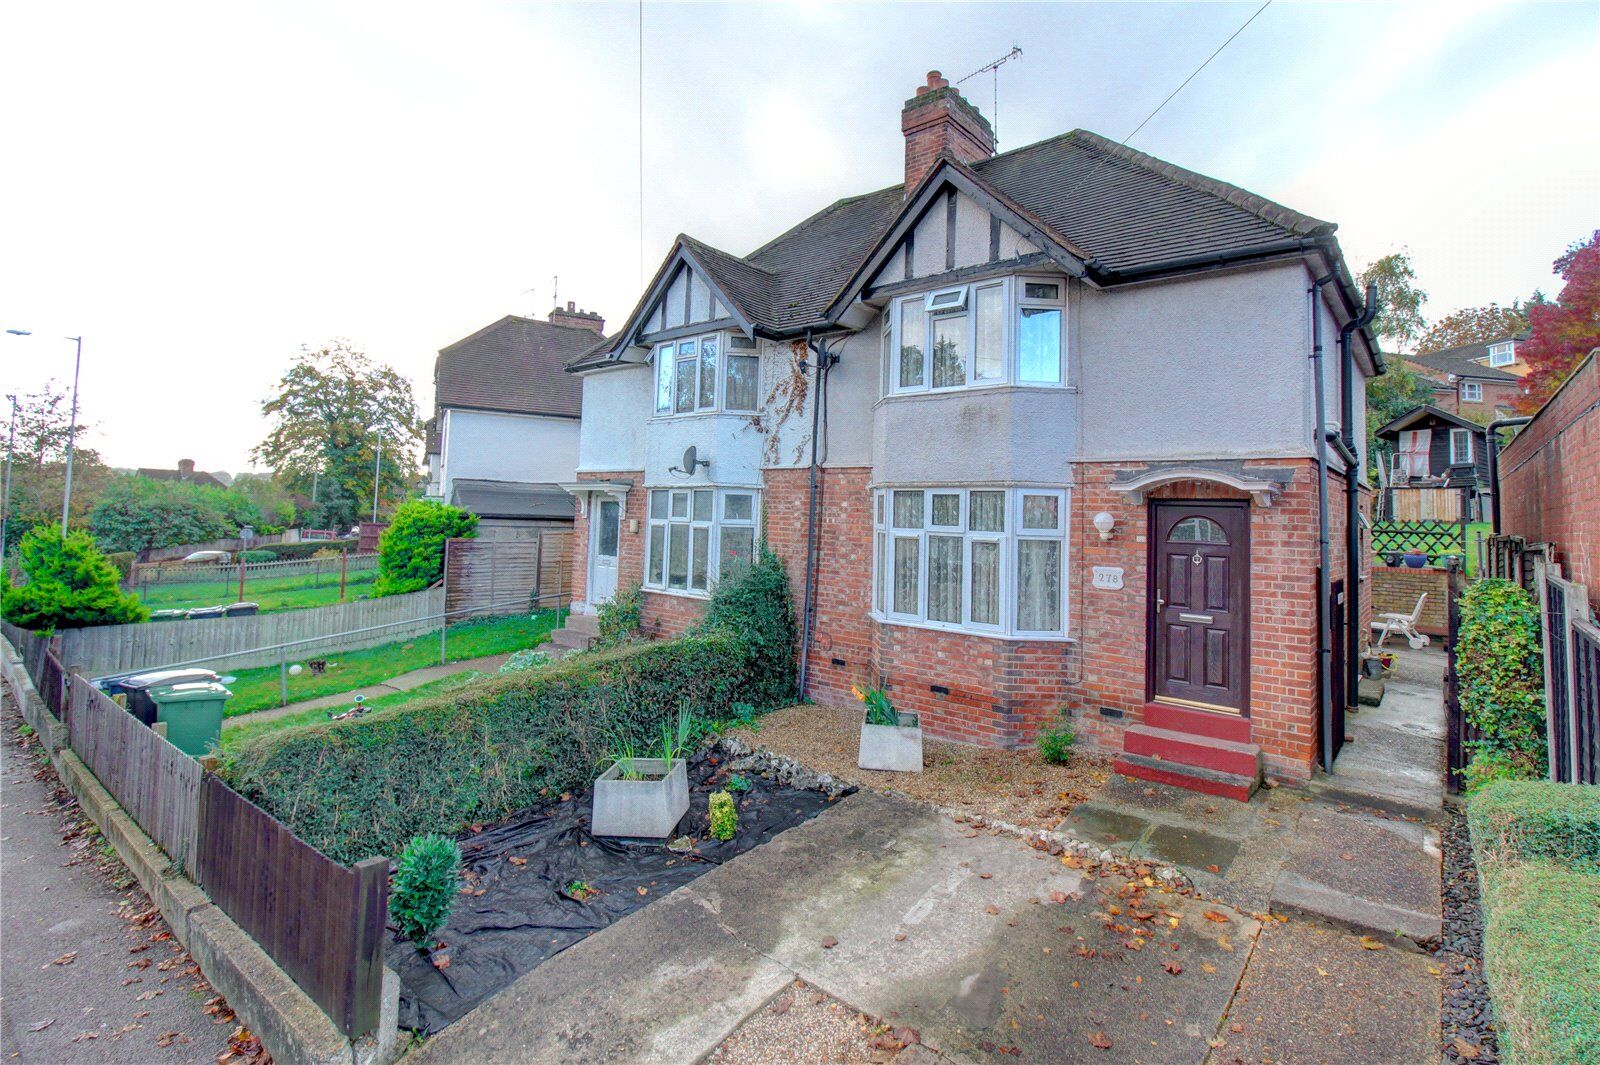 3 bedroom semi detached house for sale Bowerdean Road, High Wycombe, HP13, main image